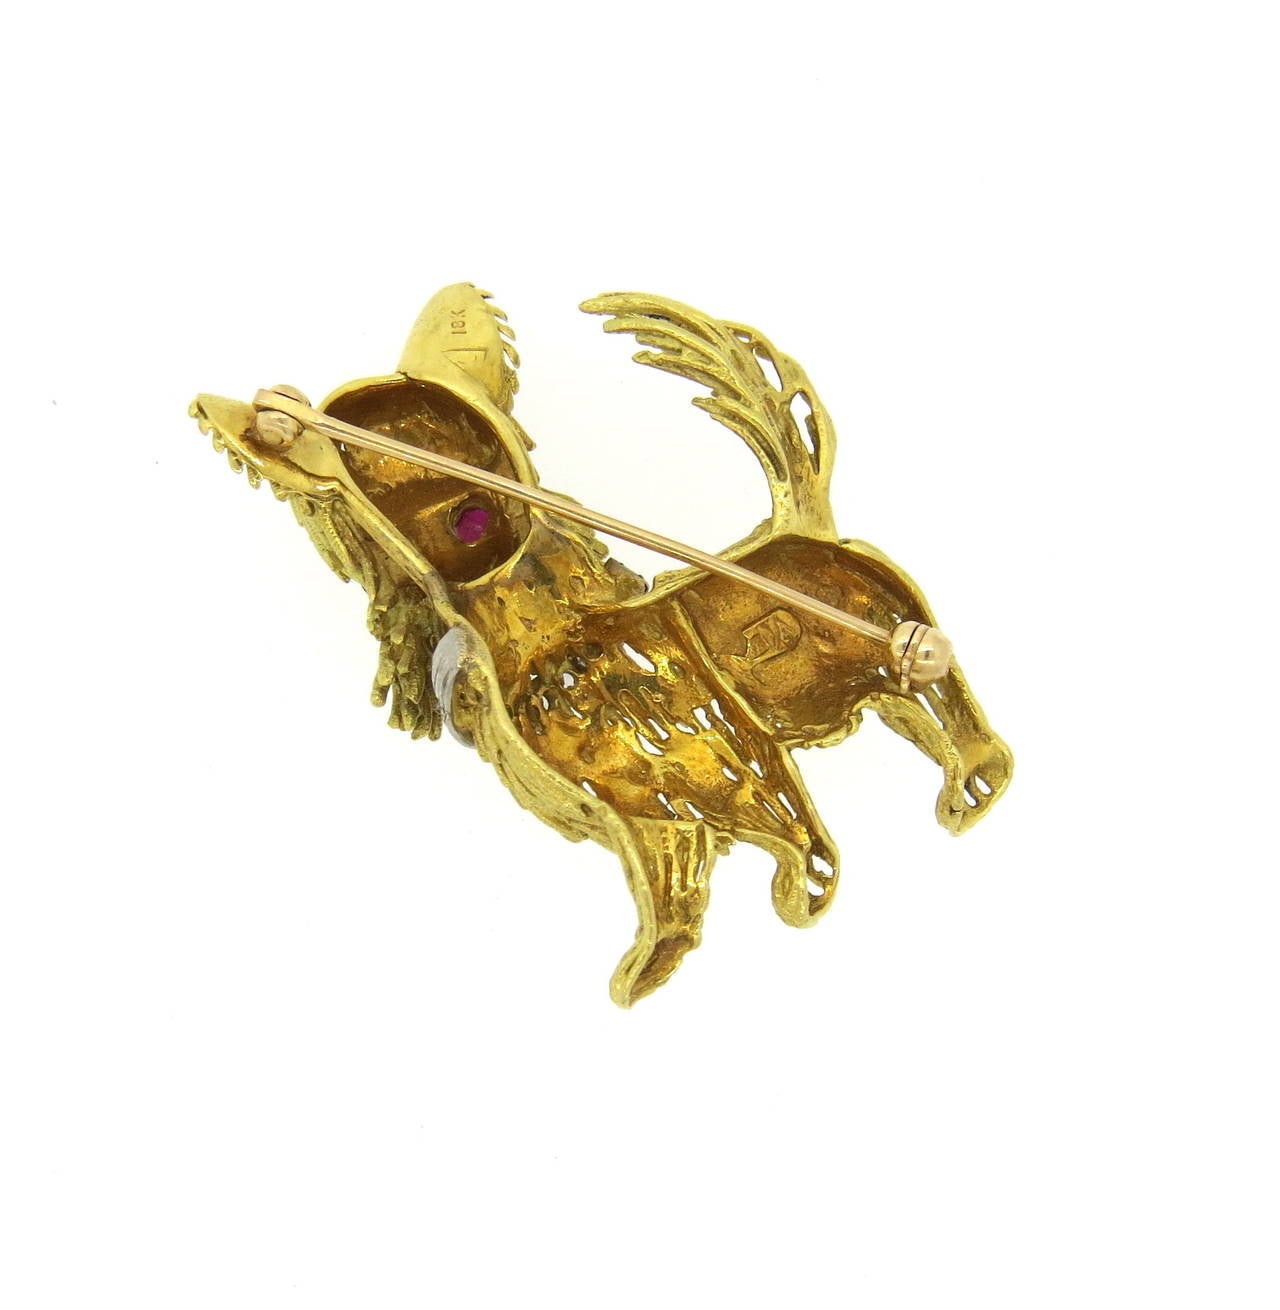 1960s 18k gold brooch pin, depicting dog, set with ruby eyes and diamond collar. Brooch measures 38mm x 30mm. Weight of the piece - 14.6 grams